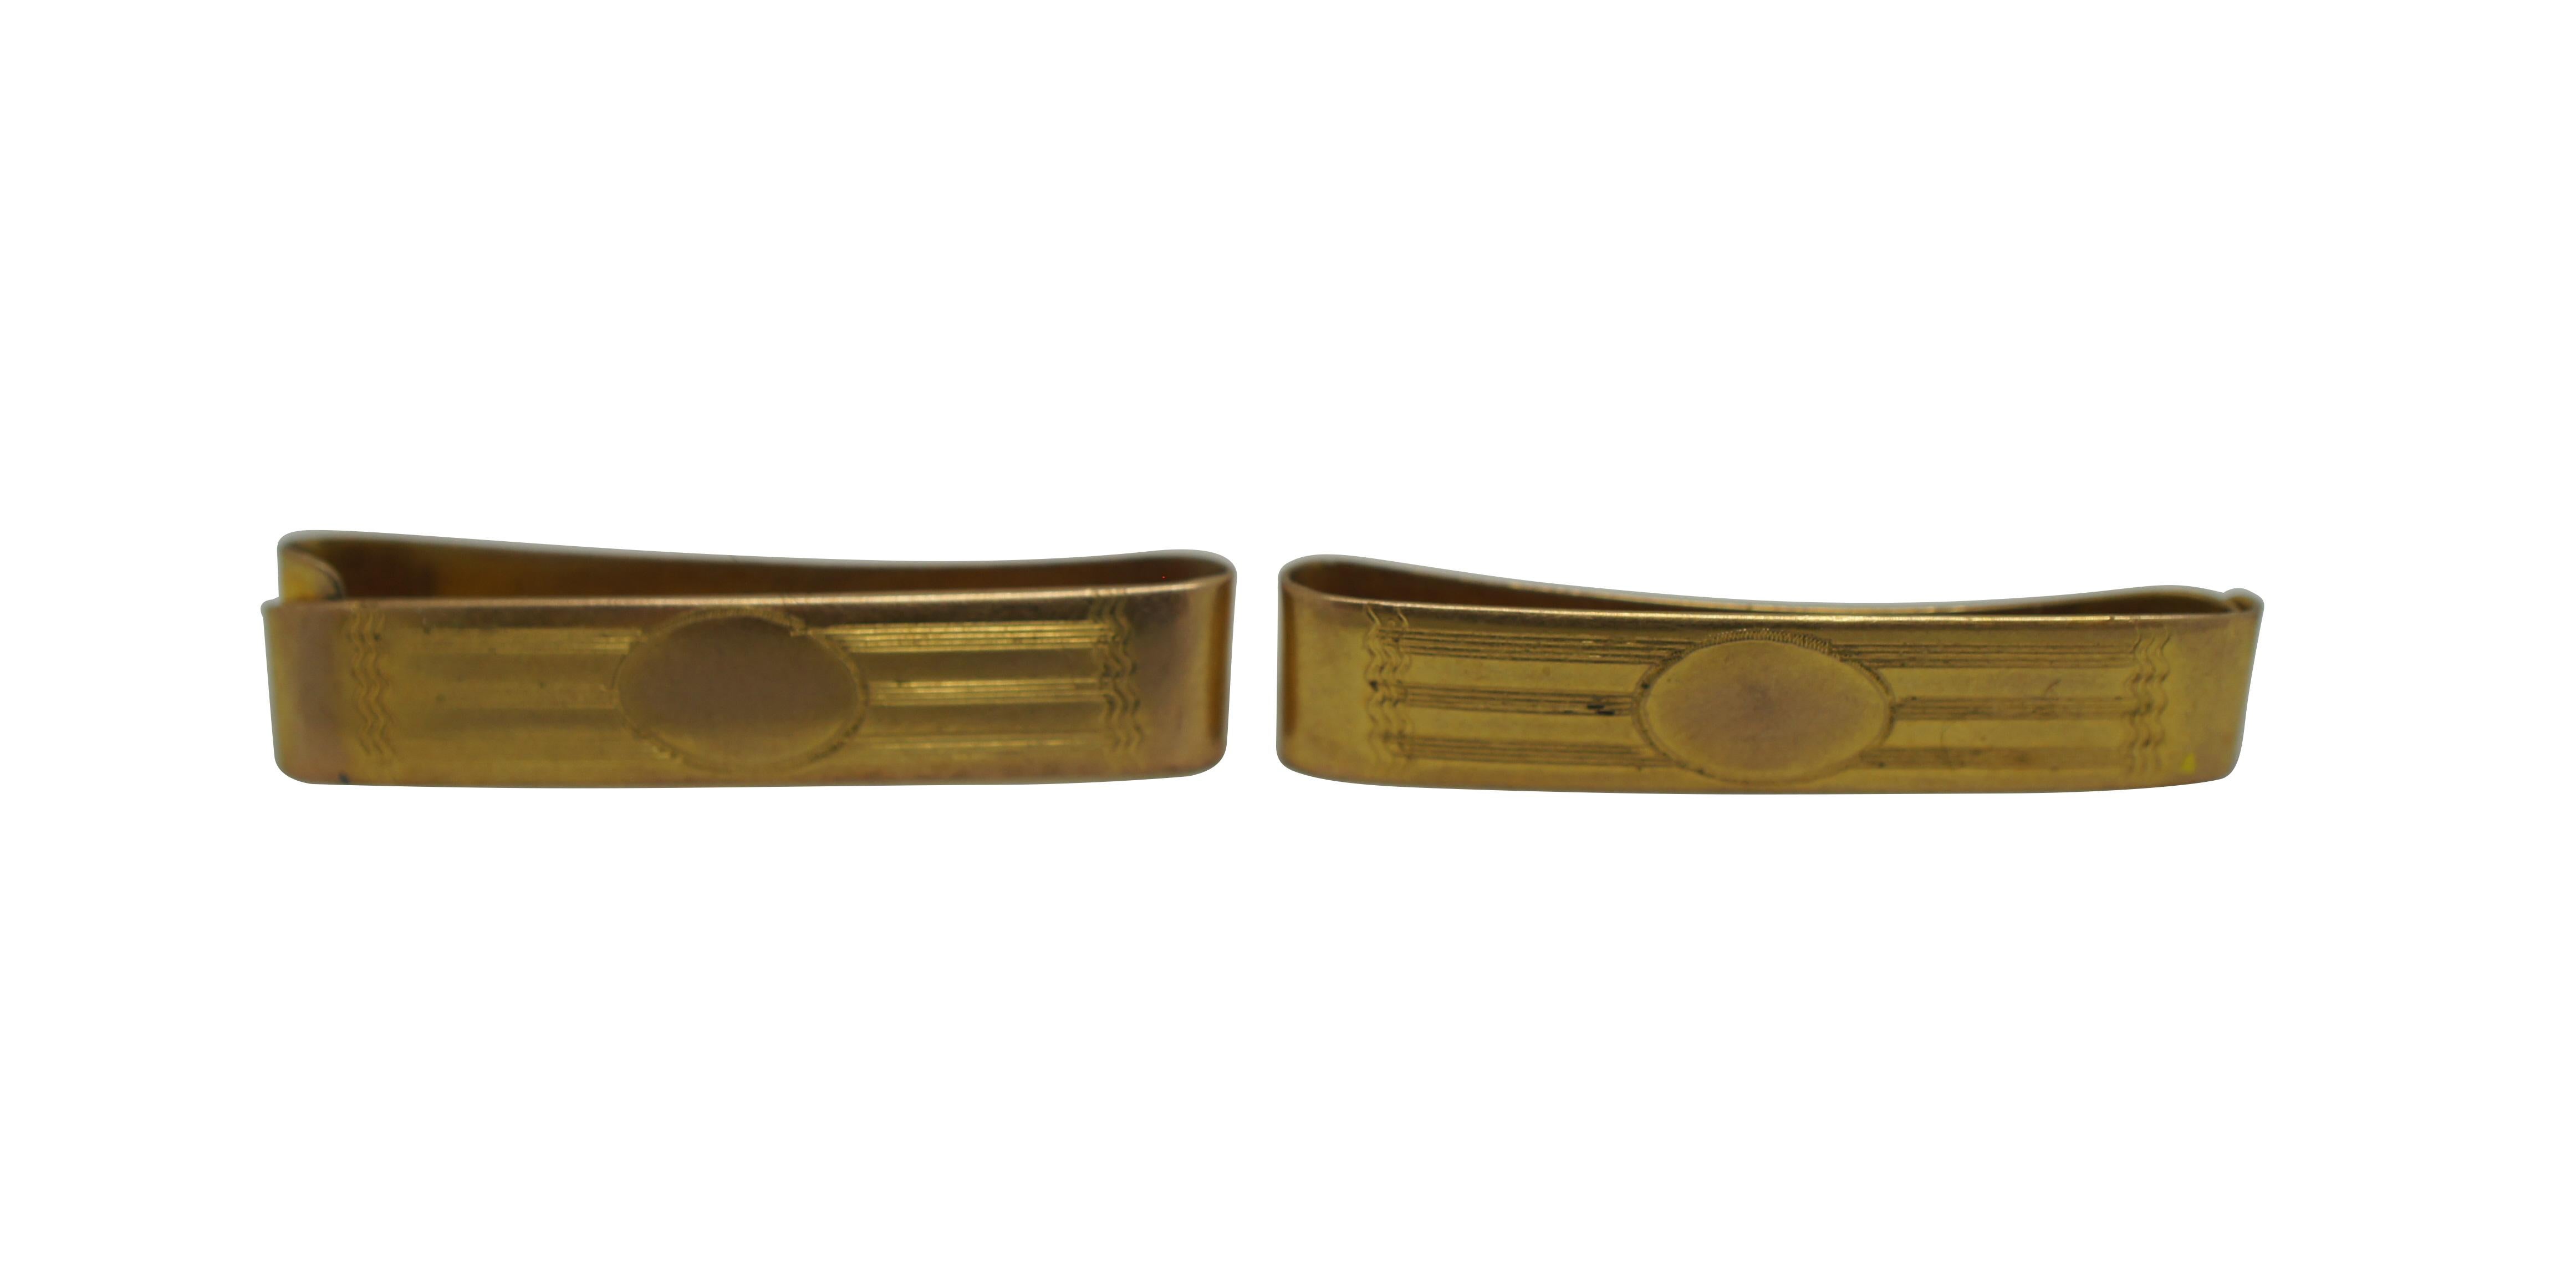 Pair of early 20th century Ballou & Co 10k yellow gold tie bar / clasps etched with a simple, classic motif of an oval backed with stripes and waving lines.

“Ballou & Company, Inc - Established circa 1868, Providence, Rhode Island. Registered circa